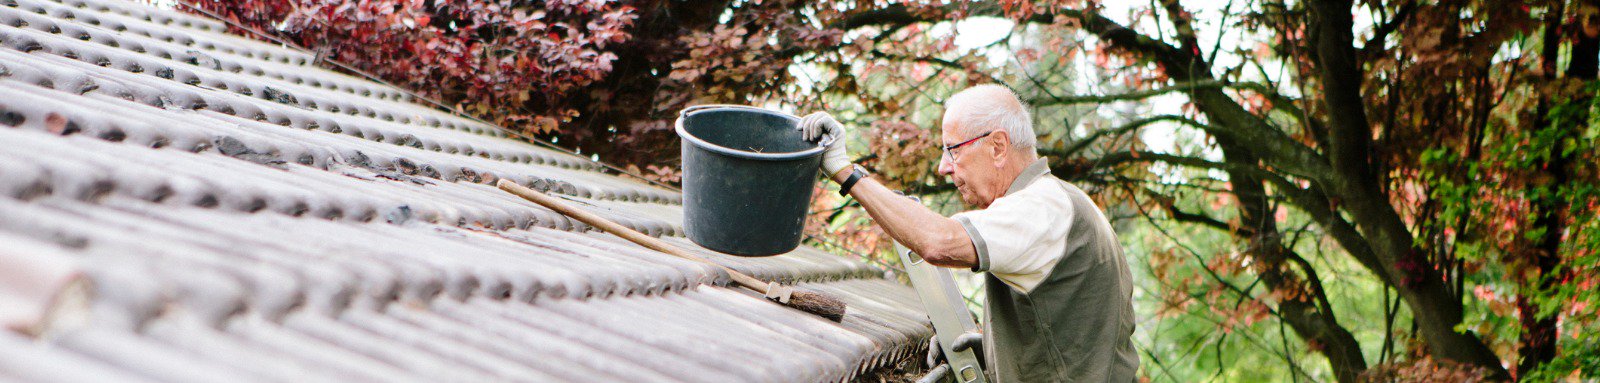 Senior man stands on ladder and cleans a roof gutter